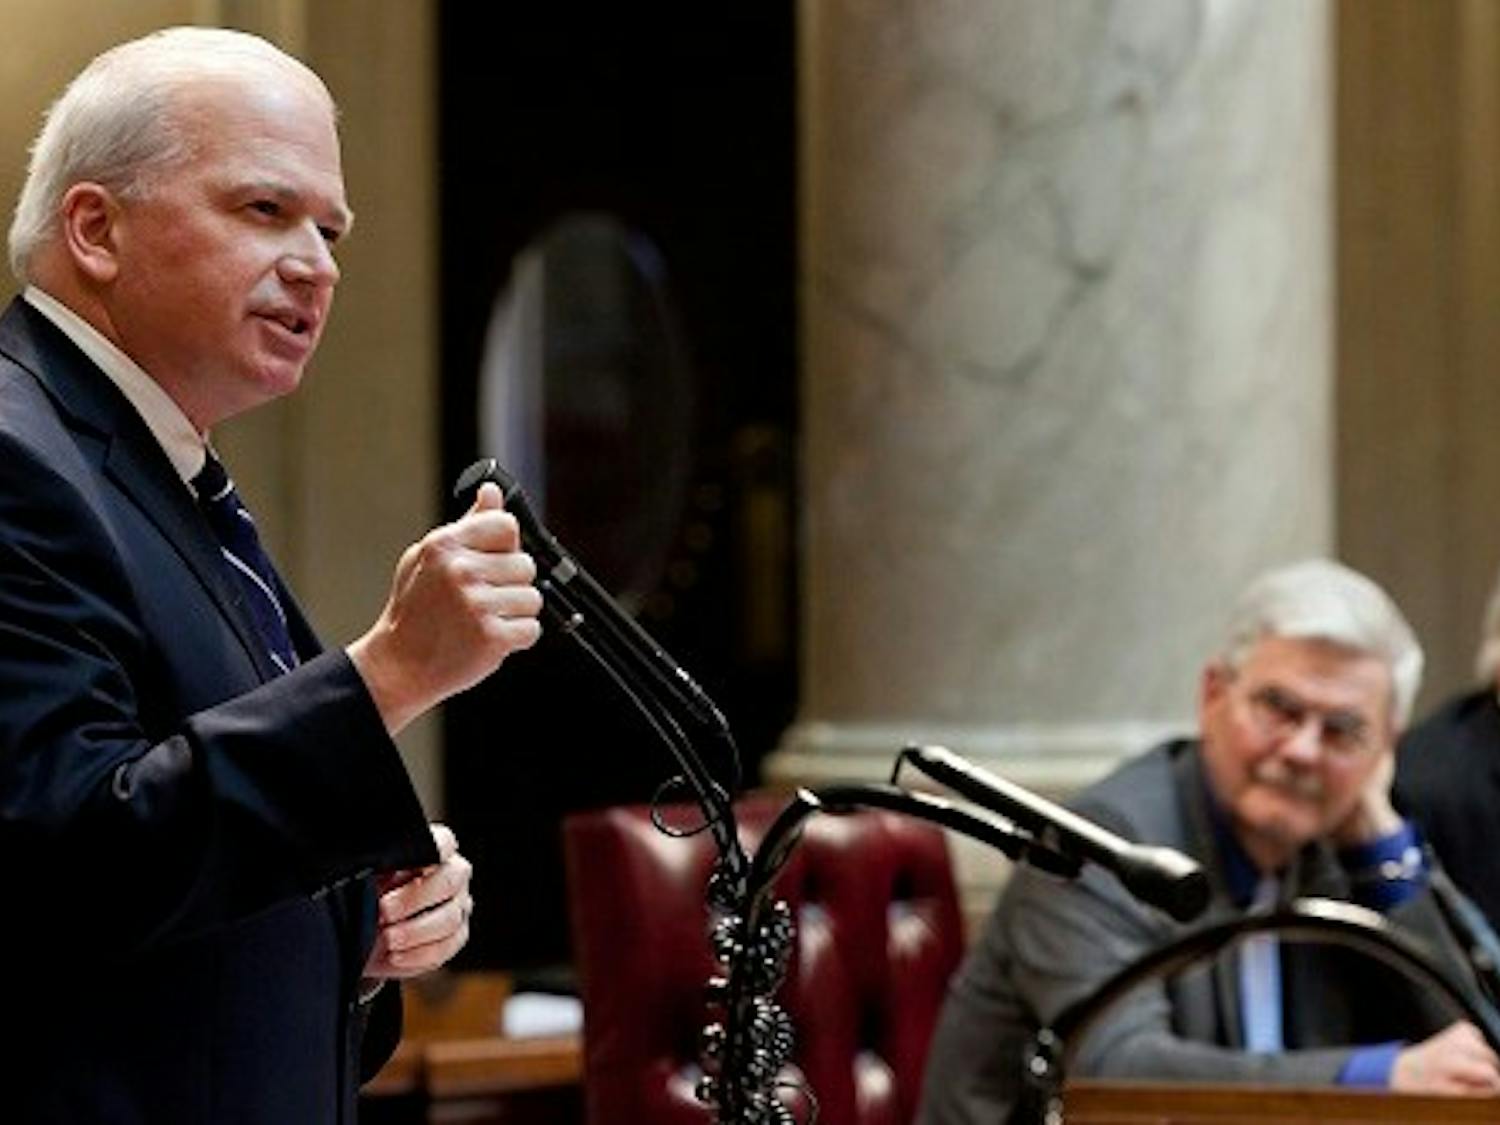 Senate Majority Leader Scott Fitzgerald, R-Juneau, said Friday that one of the five bills in Gov. Scott Walker’s college affordability package will not be voted on by his body.